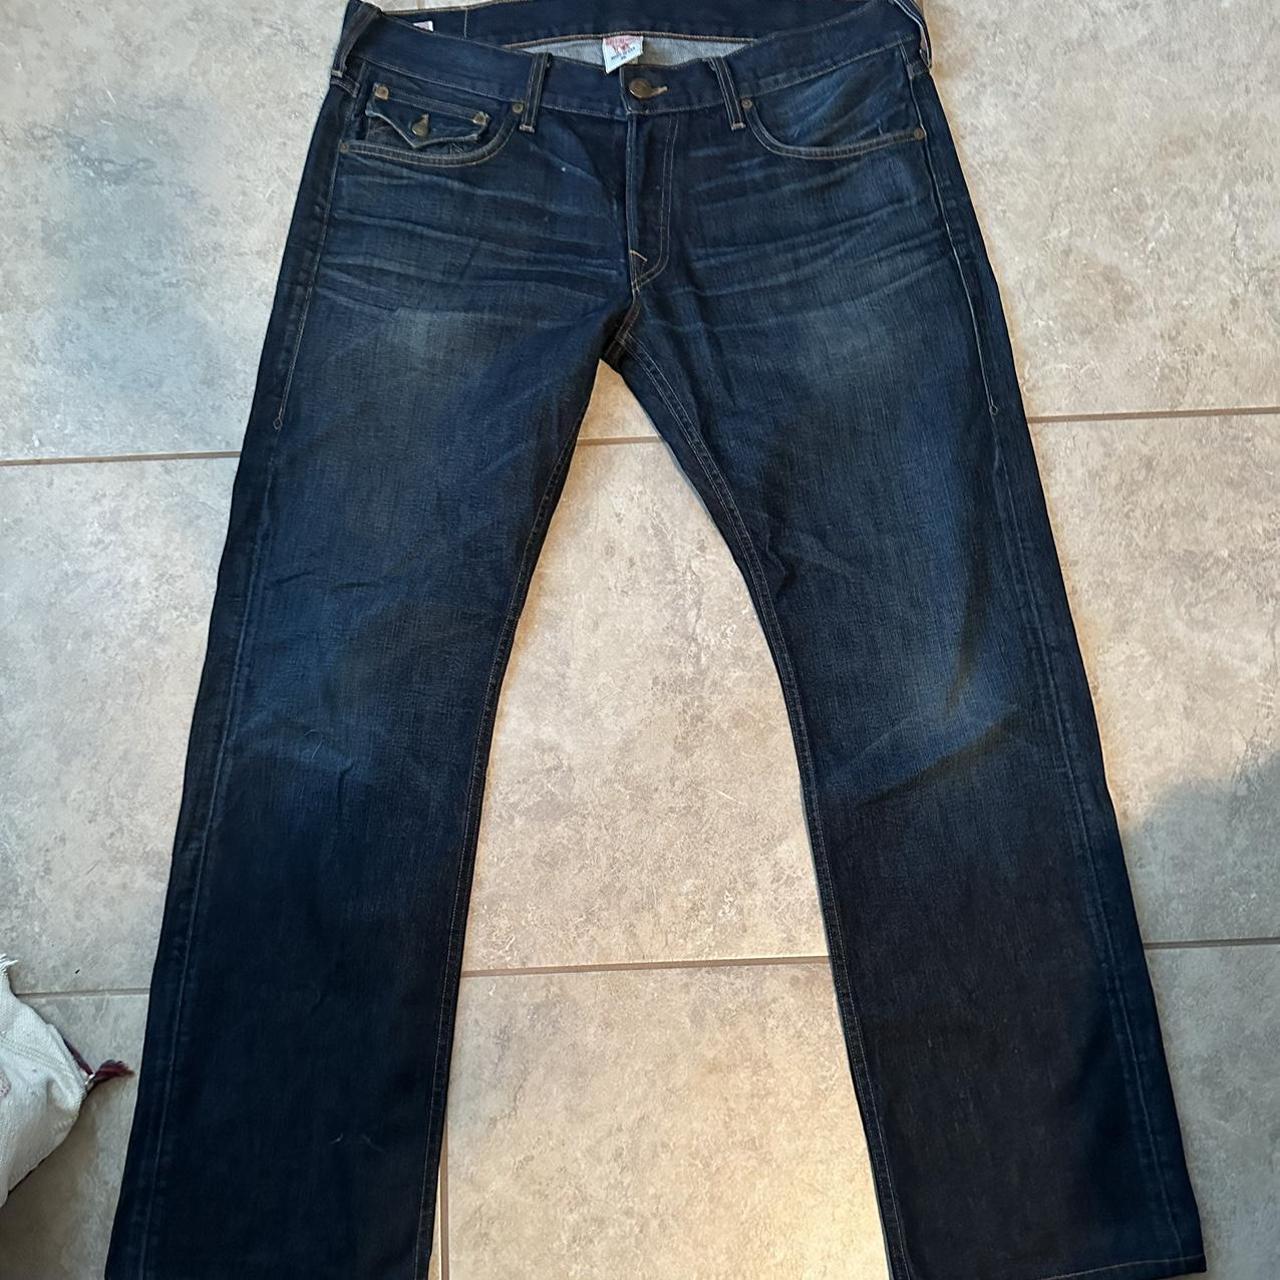 Rare true religion jeans - only back tag seen on... - Depop